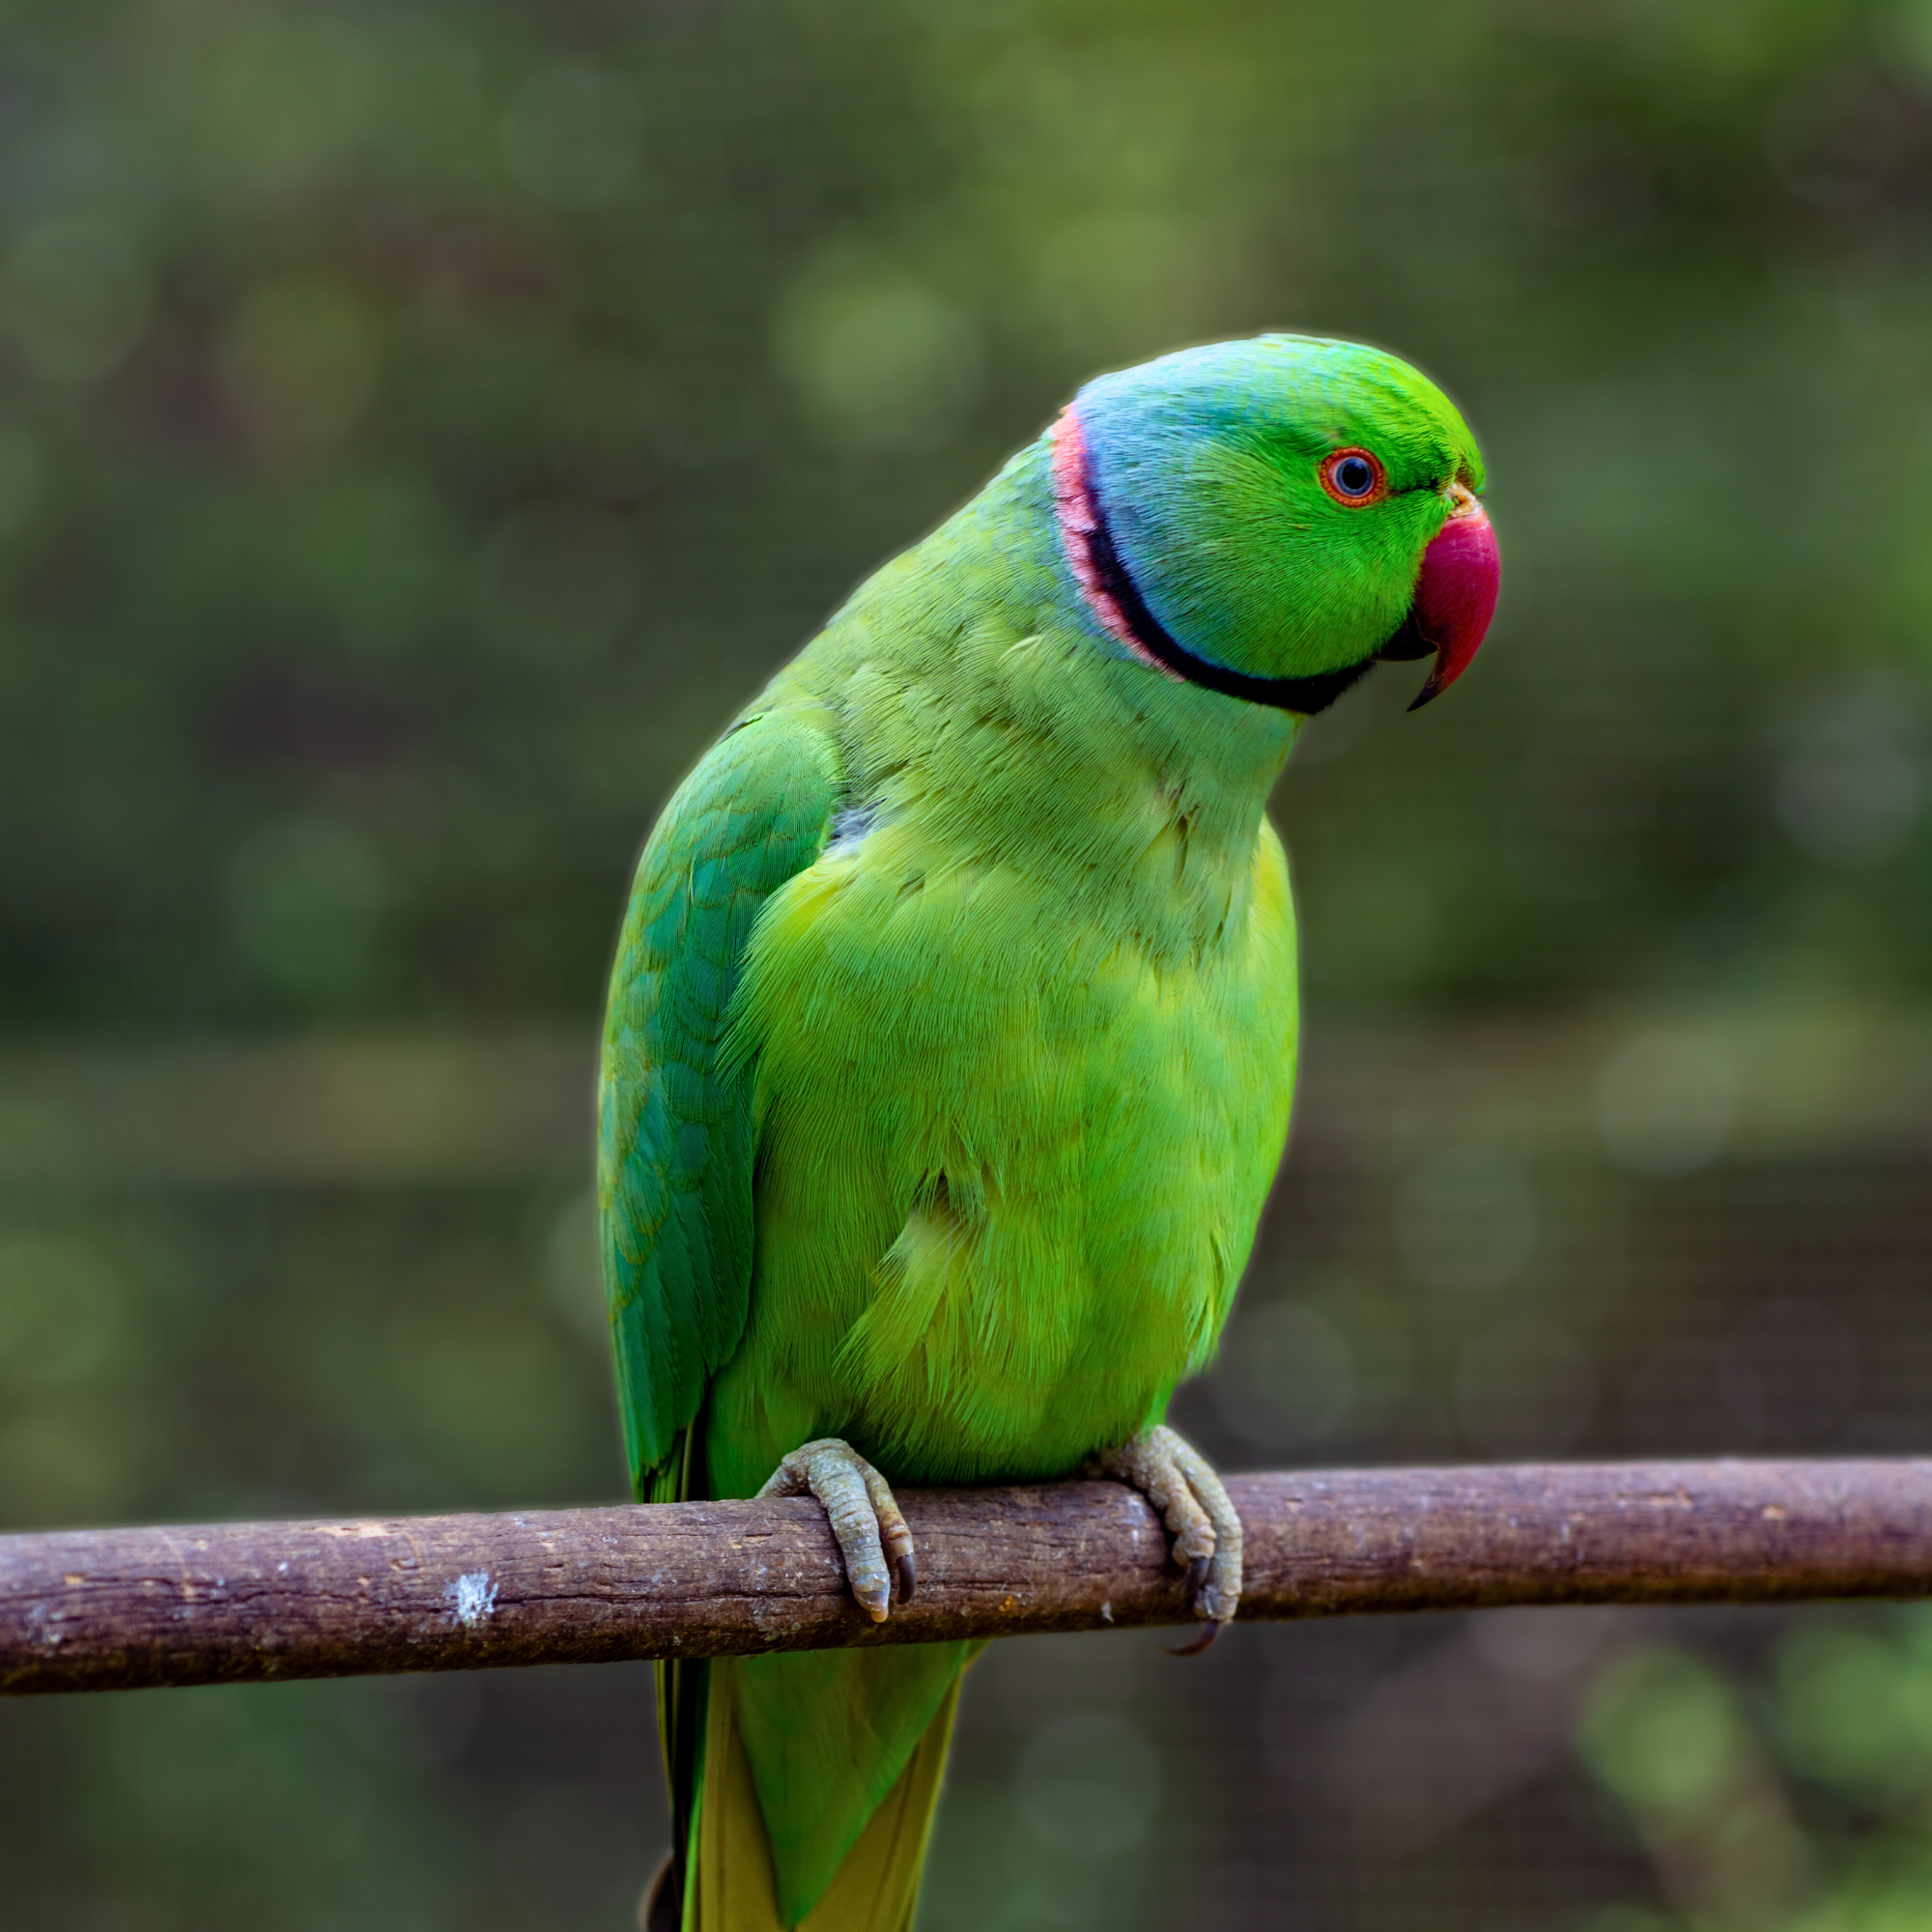 Help with age. | Parrot Forum 🦜 Parrot Owners Community